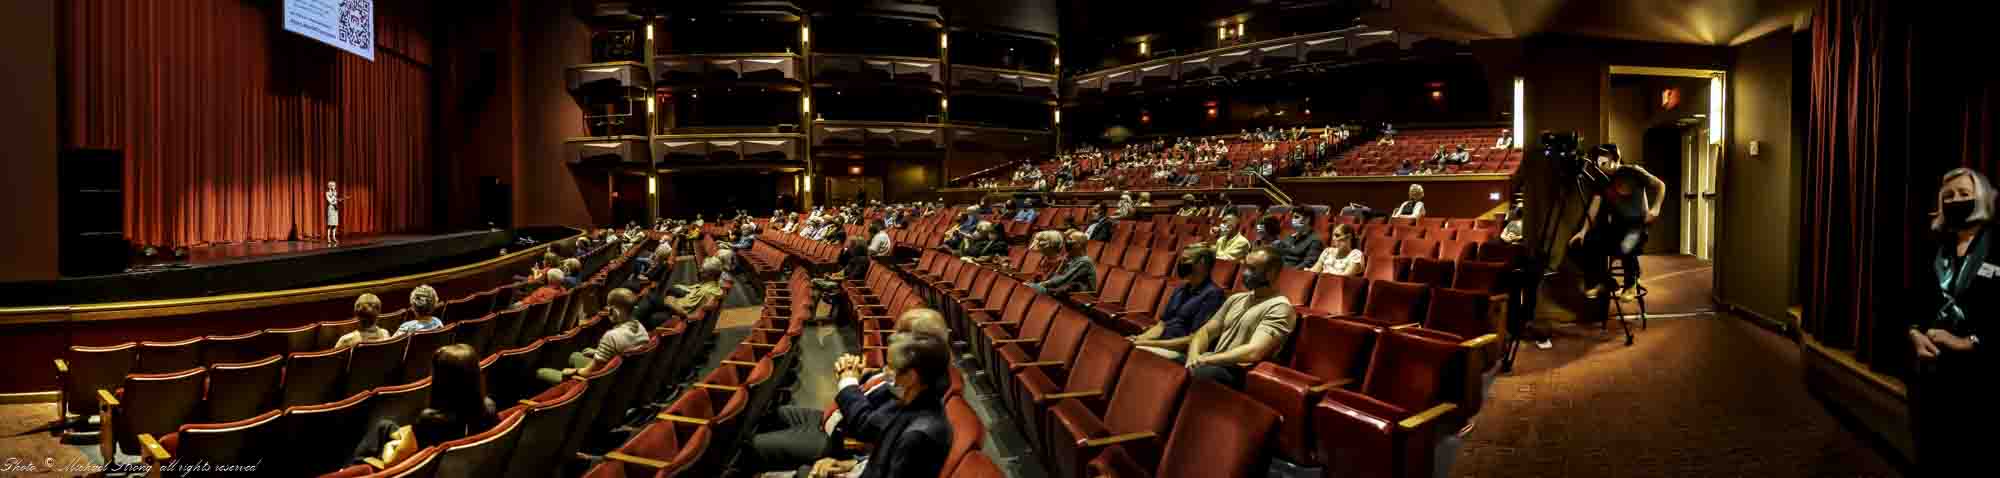 Spaced, assigned seating with masks and limited to 200. Total seating capacity is 1,341 divided into Orchestra (directly in front of camera), Tier (right at back), Balcony (above tier) and Box (directly above camera and in the same arrangement directly across). Emily Behrmann, director Midwest Trust Center (formerly Carlsen Center ) at JCCC is giving the welcoming speech and introduction to the show. One of the four camera positions is next to the doorway at right, paired with one on the other side, one in the pit moving left and right on dolly tracks and one at back of the house high near control booth. - Photo, Copyright 2021 Mike Strong all rights reserved